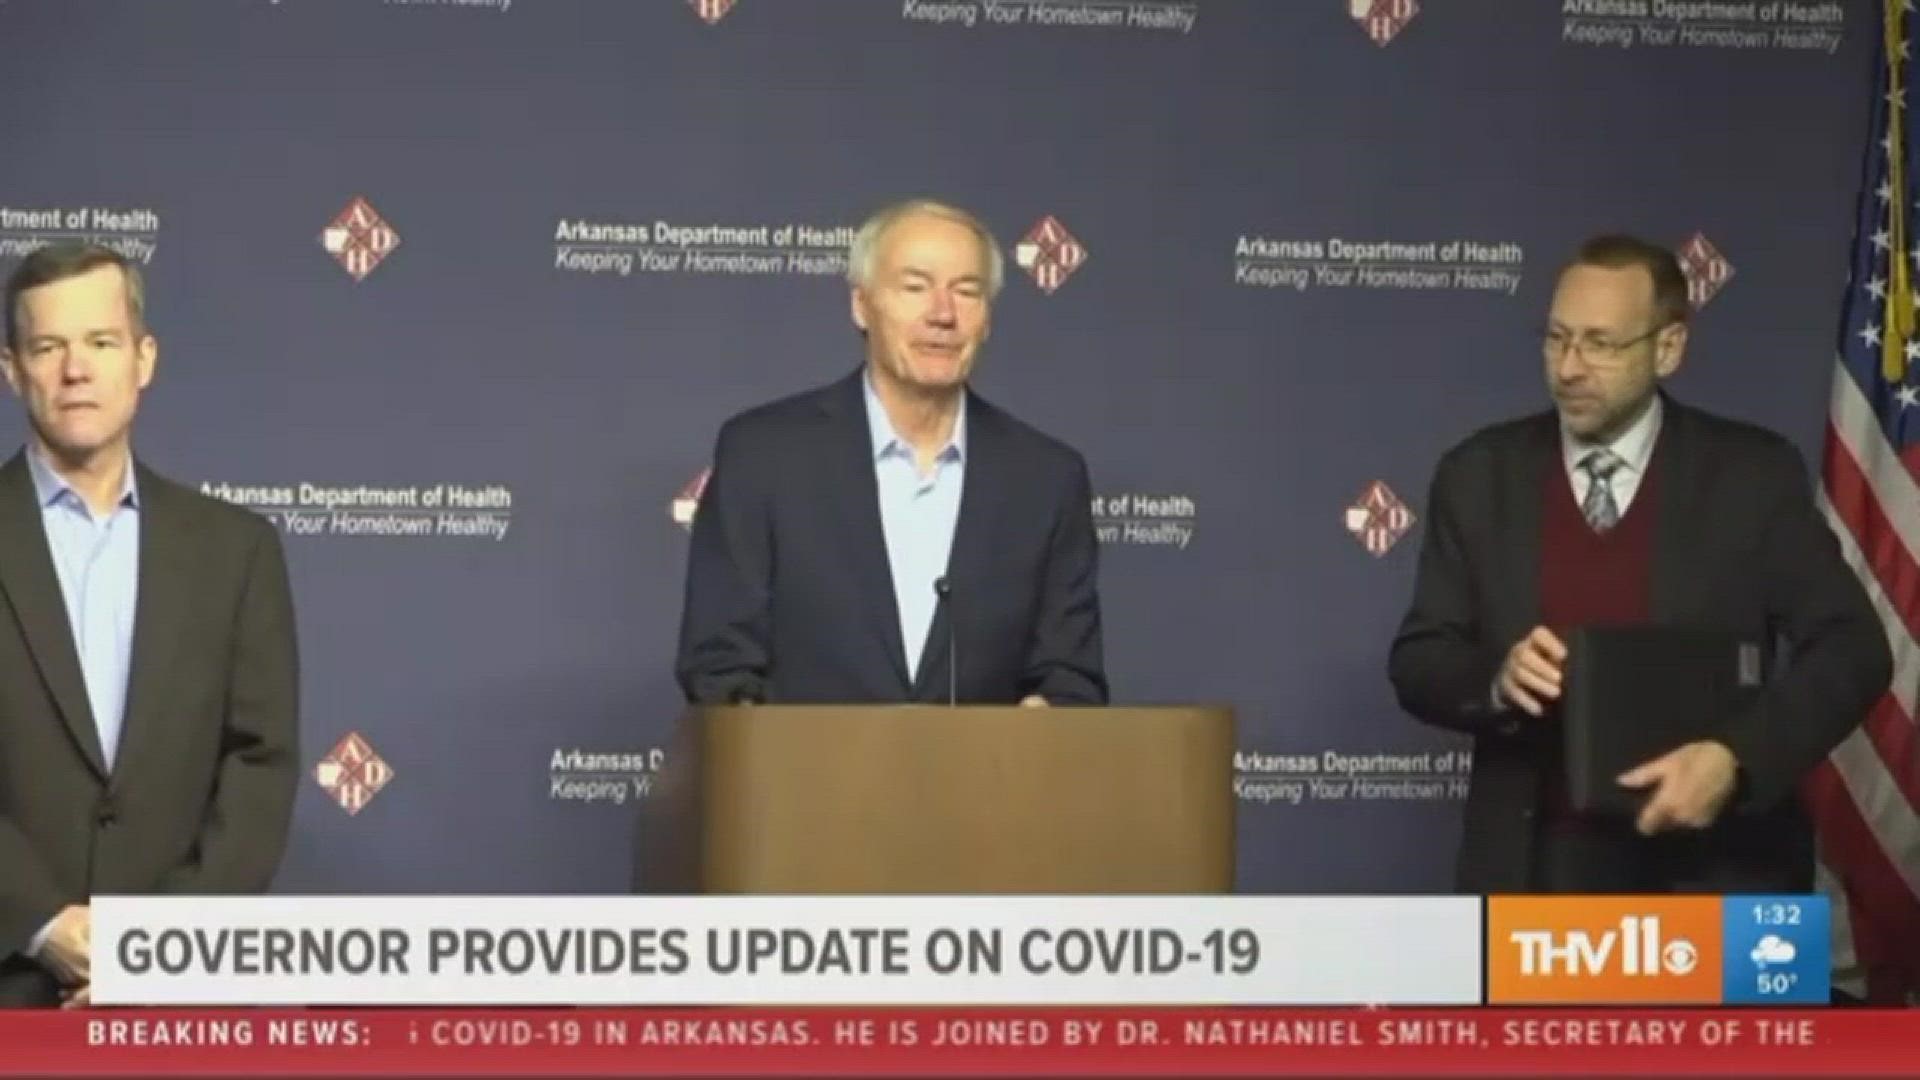 Governor Hutchinson announces there are 12 confirmed presumptive cases of COVID-19 in Arkansas.